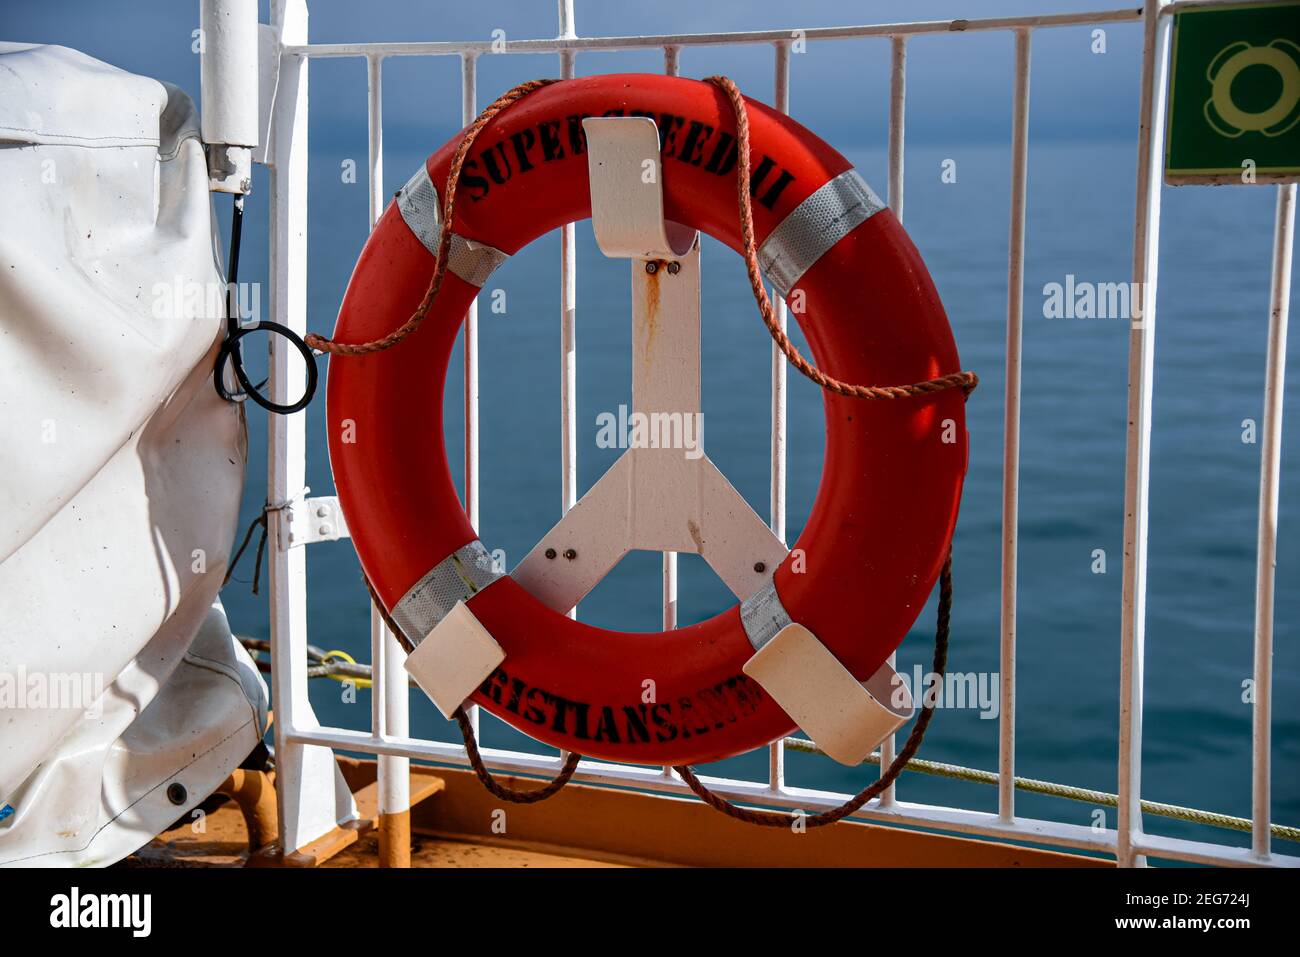 A red lifebuoy hangs on the rail of a boat on the open sea - ready to help people in distress - in the background you can see the deep blue sea on a b Stock Photo